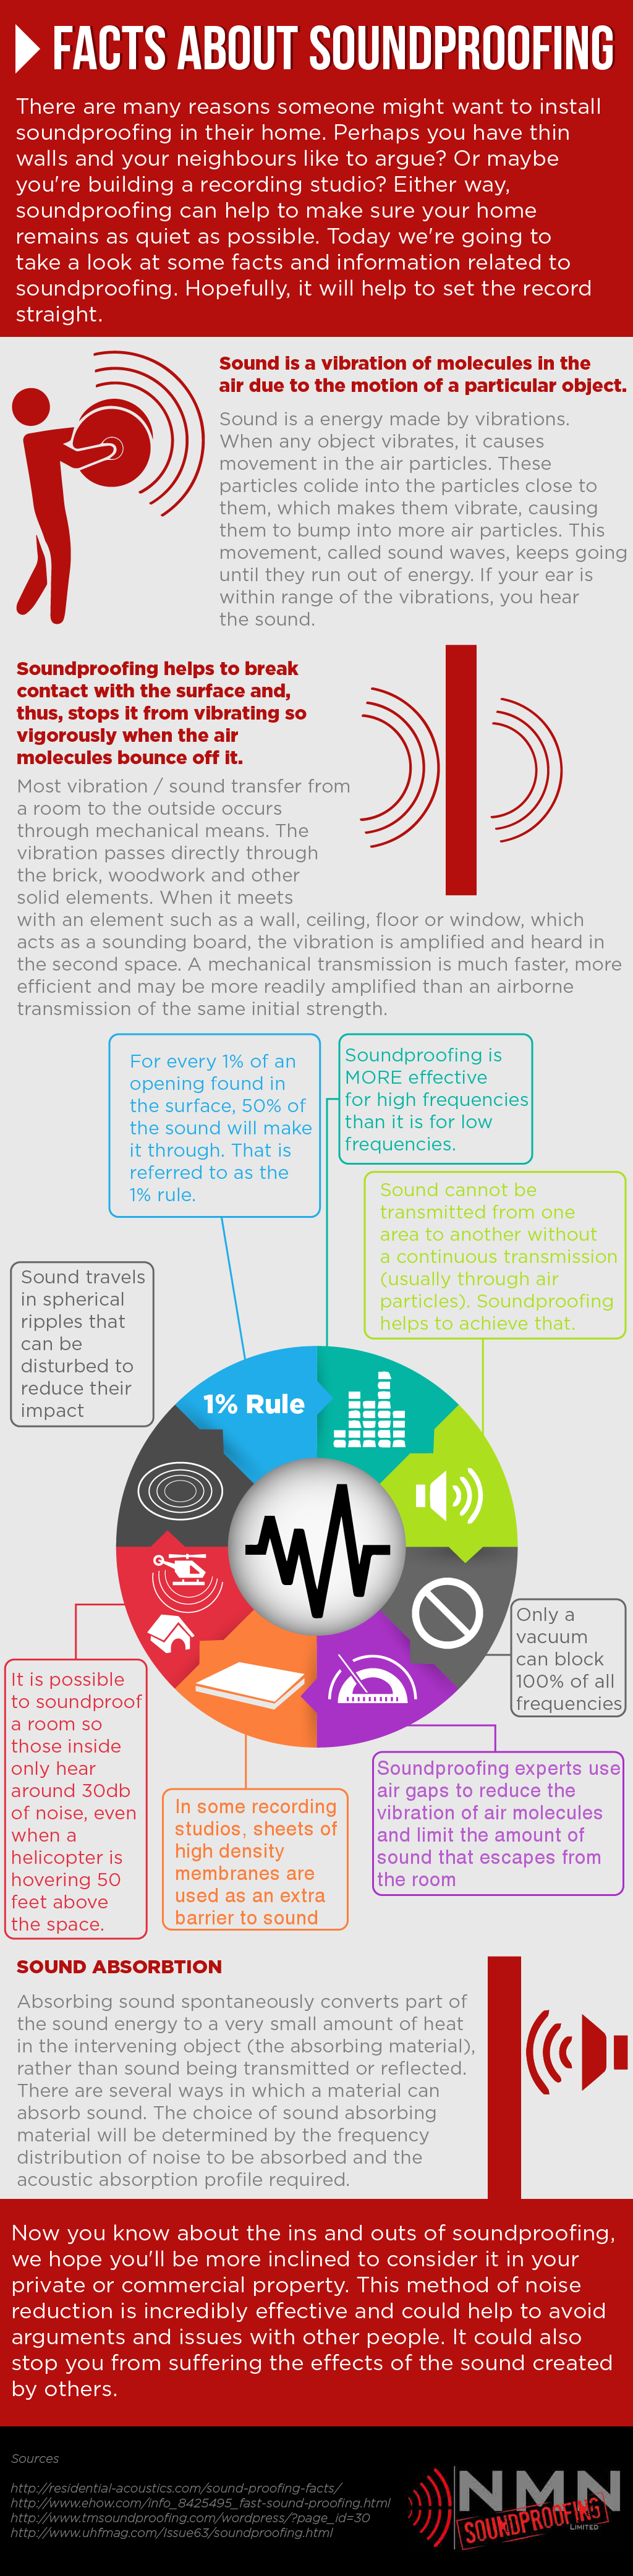 Soundproofing Facts